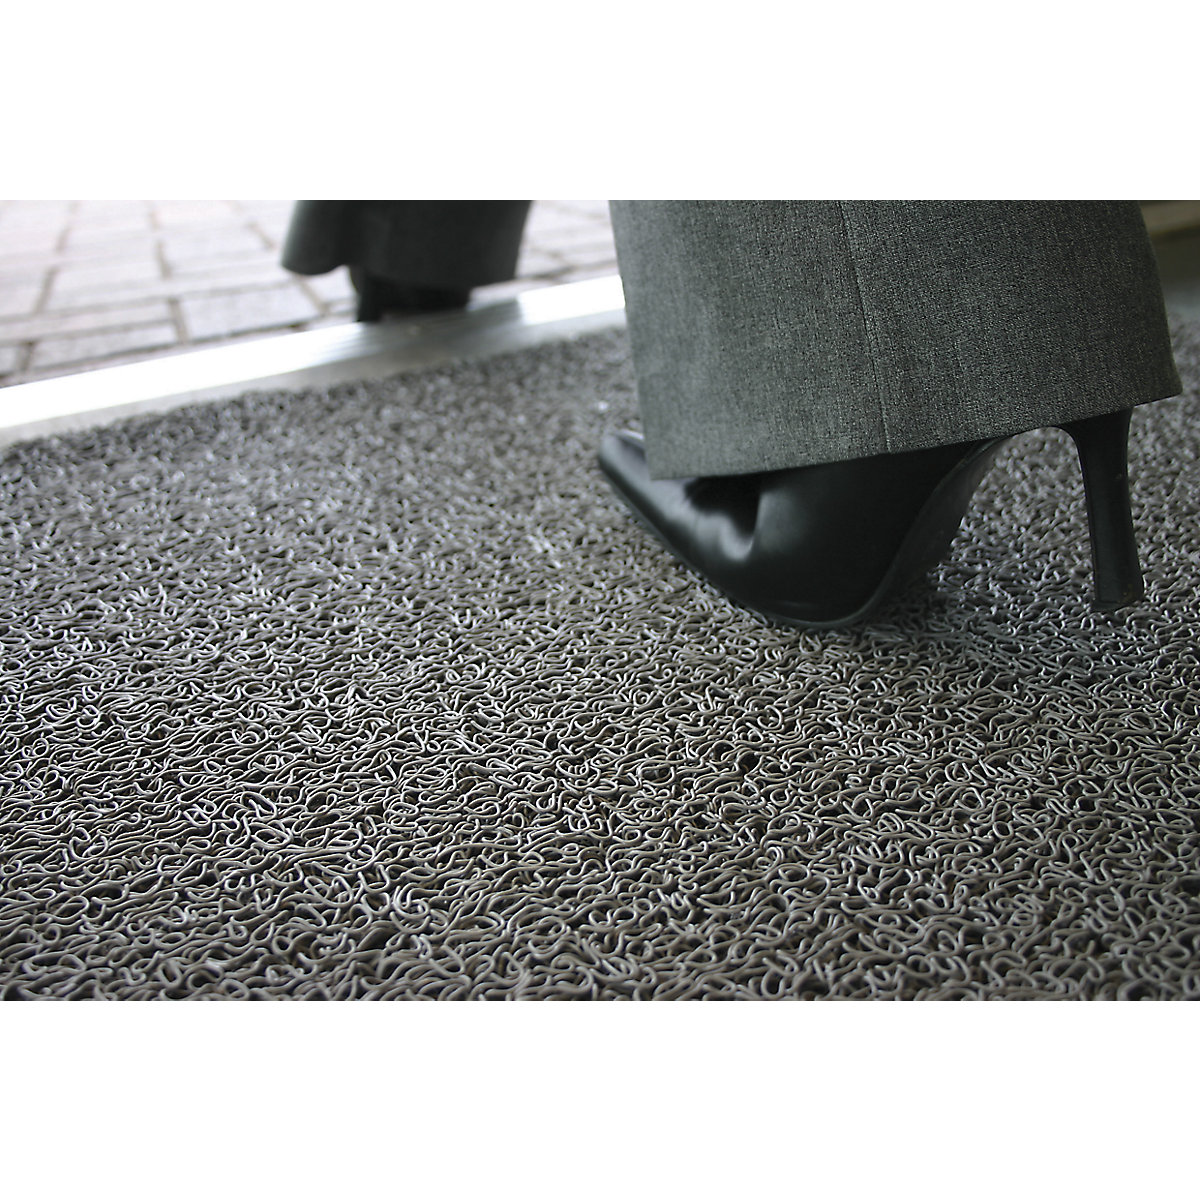 Entrance matting, flame resistant, LxW 3000 x 900 mm, grey